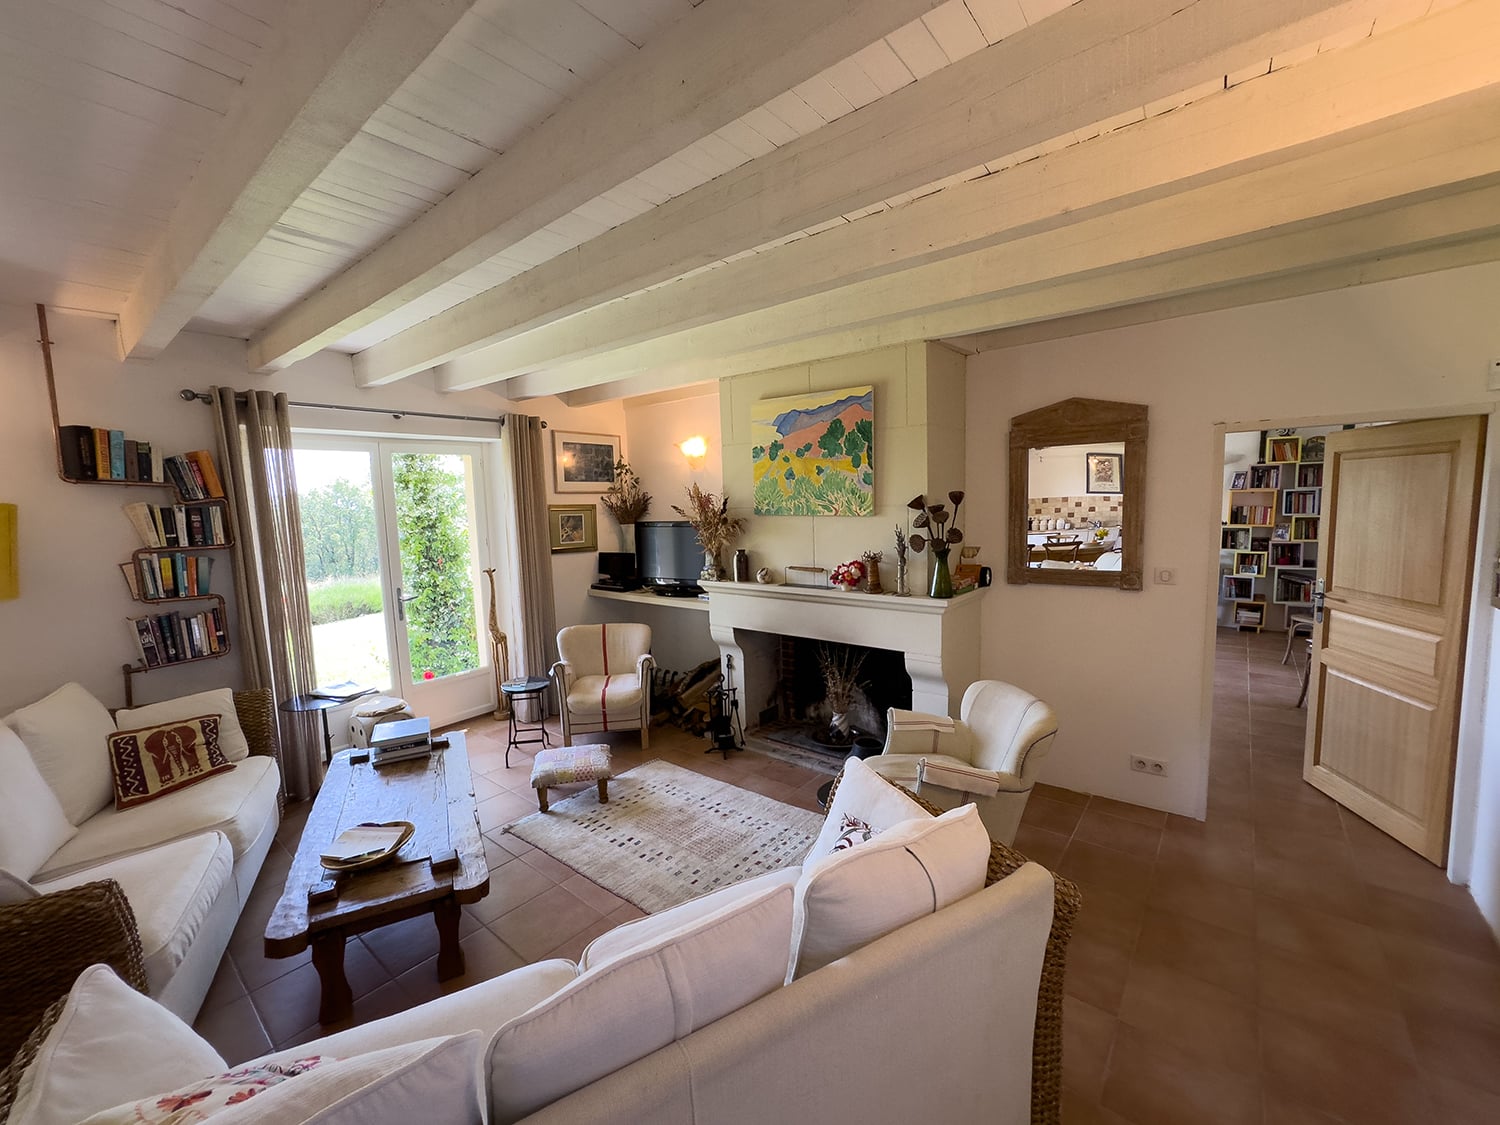 Sitting room | Holiday home in the Tarn